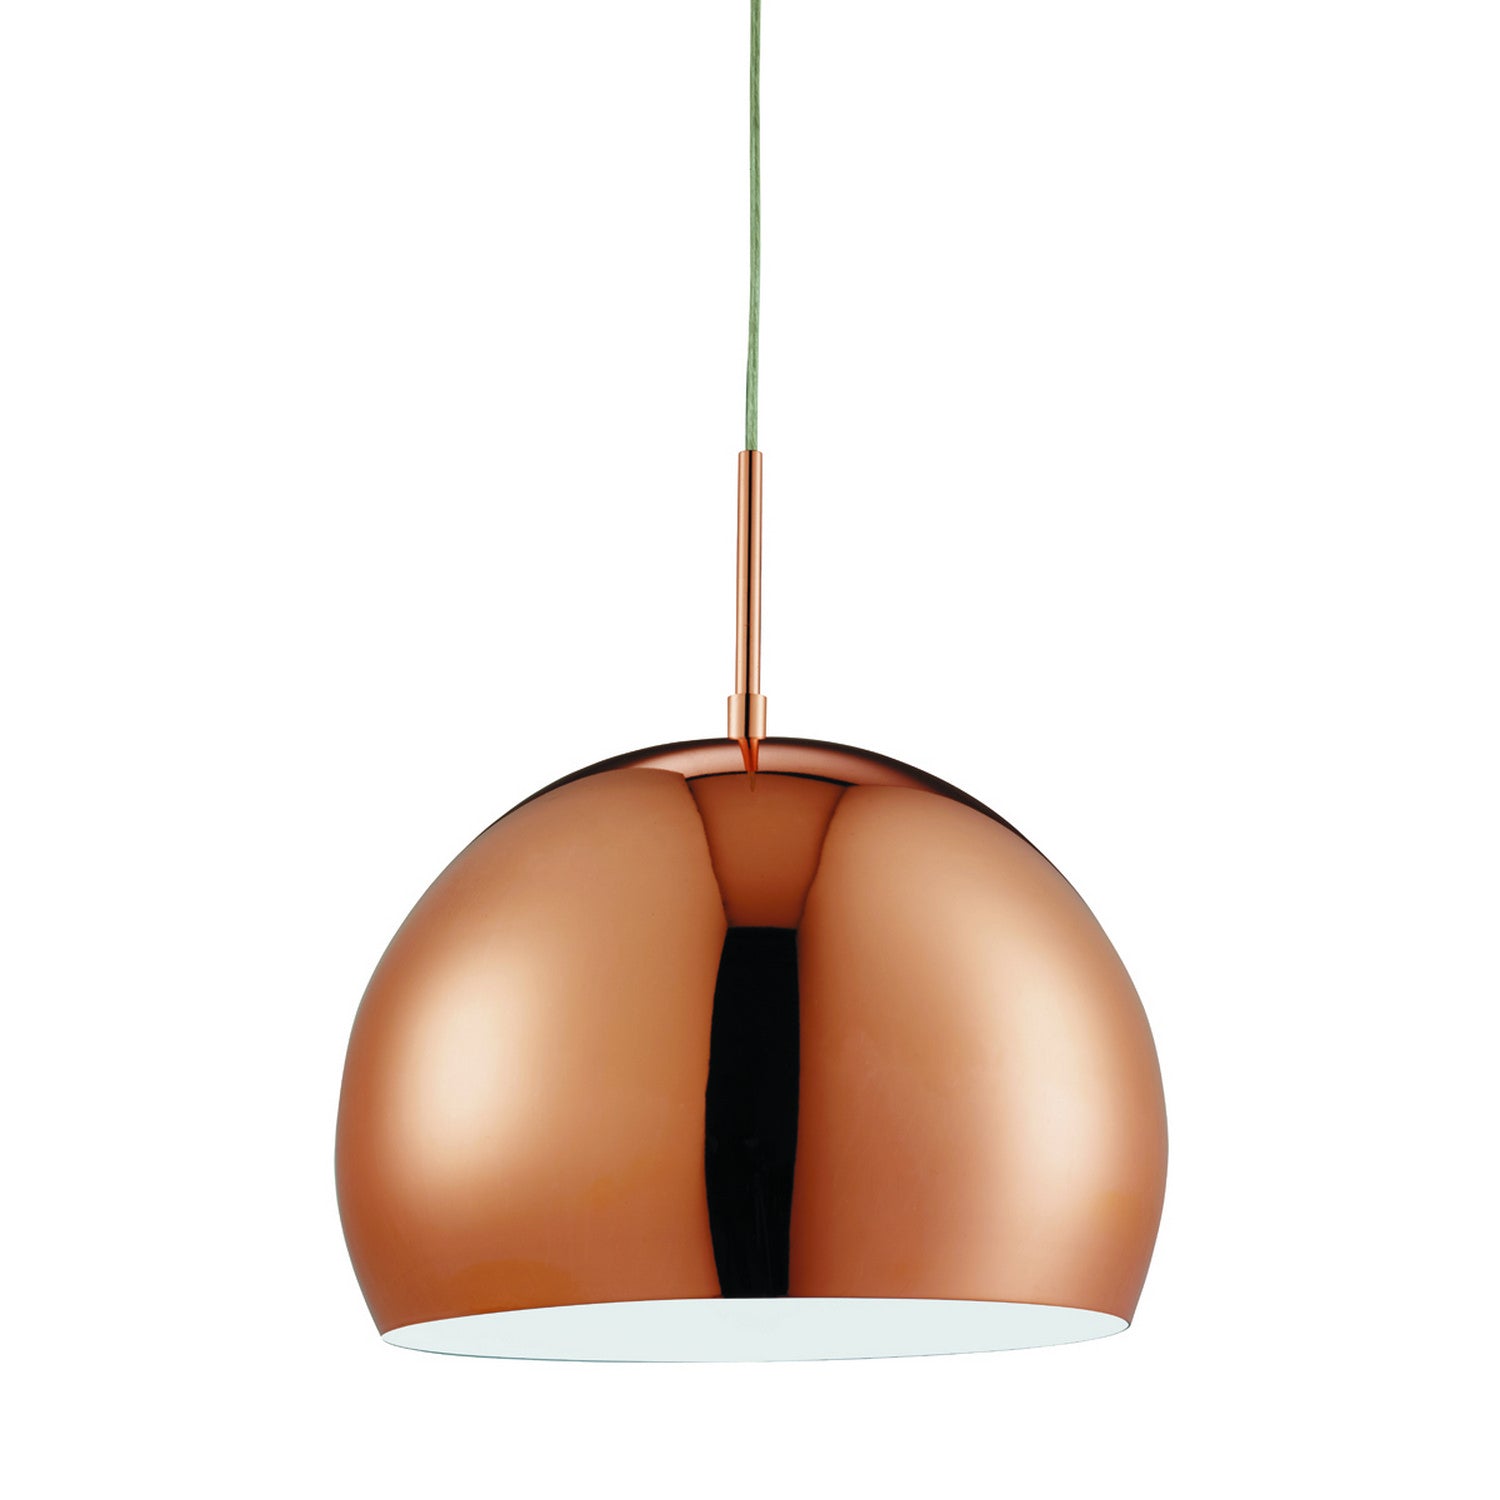 Domas Copper Ball Large Ceiling Pendant Light Lamp Shade Fitting